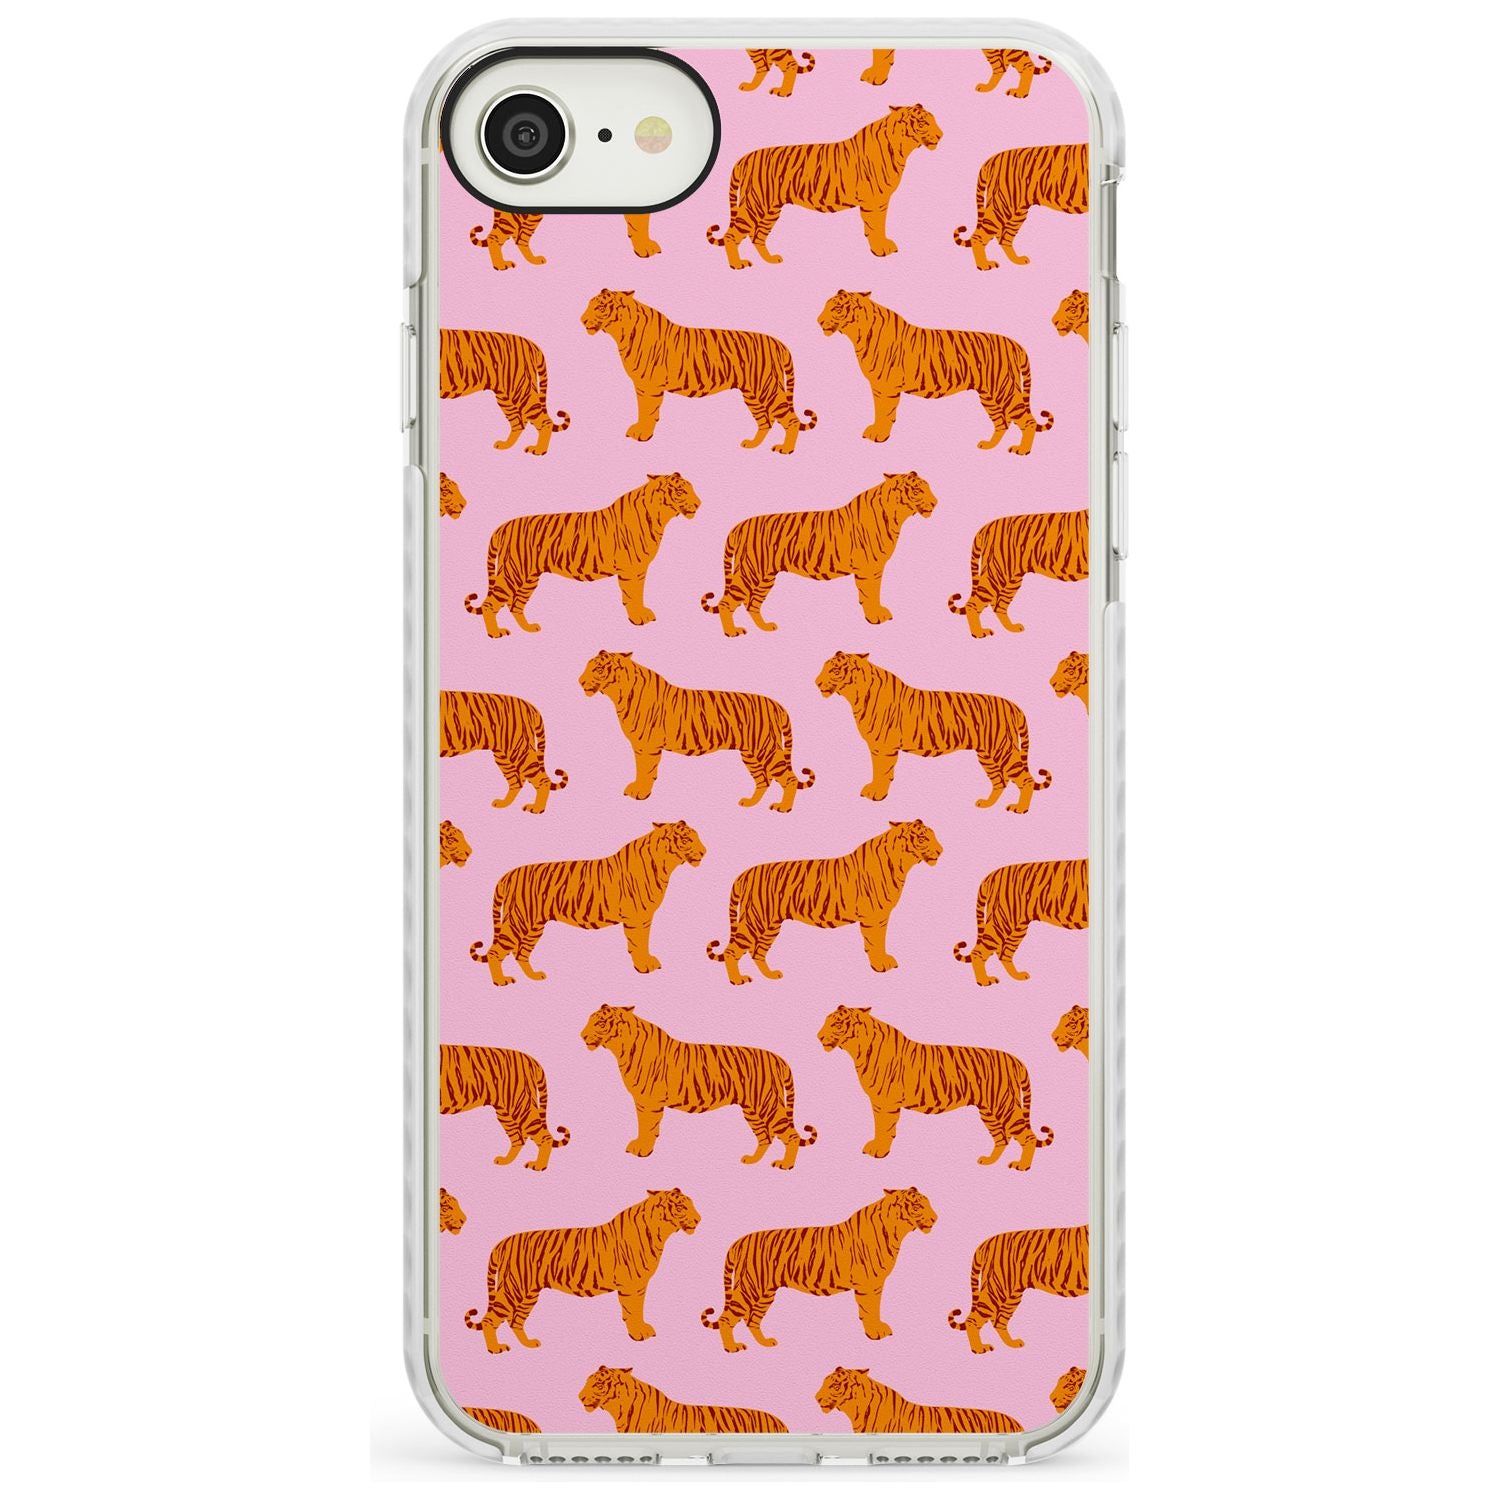 Tigers on Pink Pattern Impact Phone Case for iPhone SE 8 7 Plus